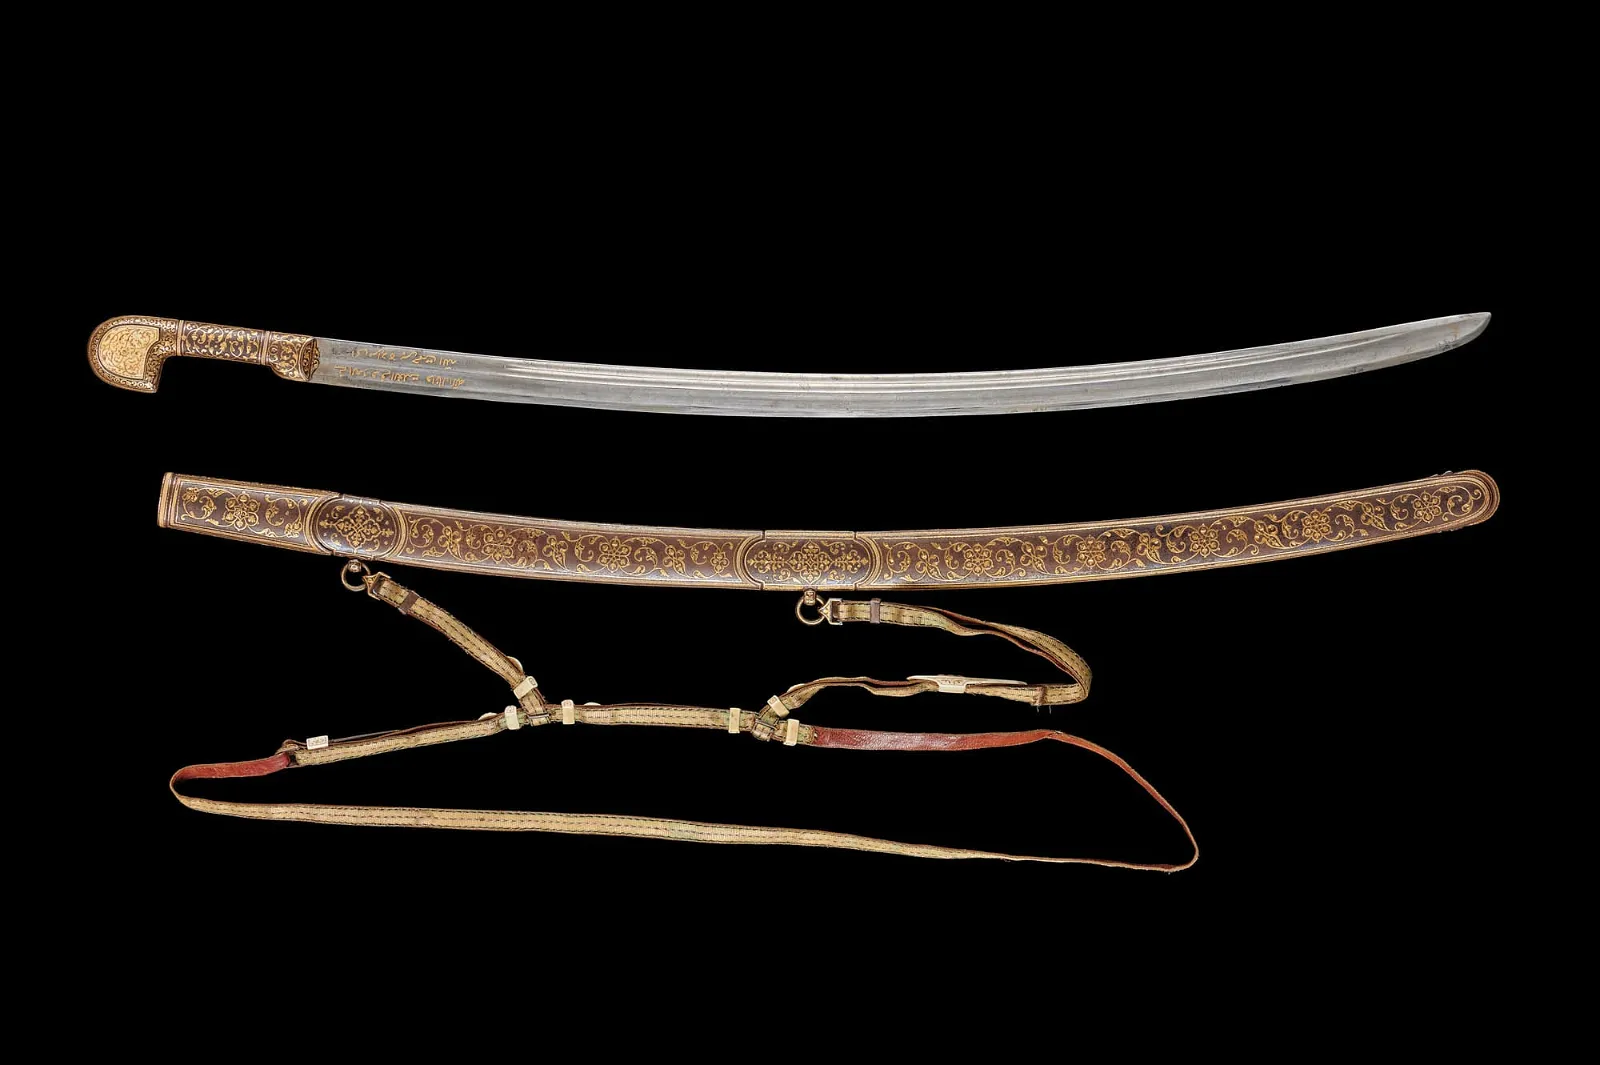 Extremely fine-quality Caucasian shashka that belonged to Nicholas II, Tsar of Russia, given to him when he was Tsesarevich (heir apparent). Research suggests it was presented to Nicholas during a tour of the Caucasus with his father Tsar Alexander III, in 1888. Arabic inscription in gold on blade near hilt: ‘(M)ay the dominance of the owner of this sword grow, and his life, and his greatness, and may Allah bless his family, and he will achieve his goal.’ Monogrammed with the letters ‘N’ and ‘A’ (for Nicholas Alexandrovich), which are surrounded by a golden laurel and surmounted by the Imperial Russian crown. Wonderfully decorated scabbard with calligraphic Arabic inscription that translates to ‘Abdullah worked,’ the equivalent of a European maker’s mark. Only royal sword ever offered for public sale. Provenance: Property of a European collector; ex Eugene Mollo collection, Switzerland. Opening bid: £1,200,000 ($1,516,300)